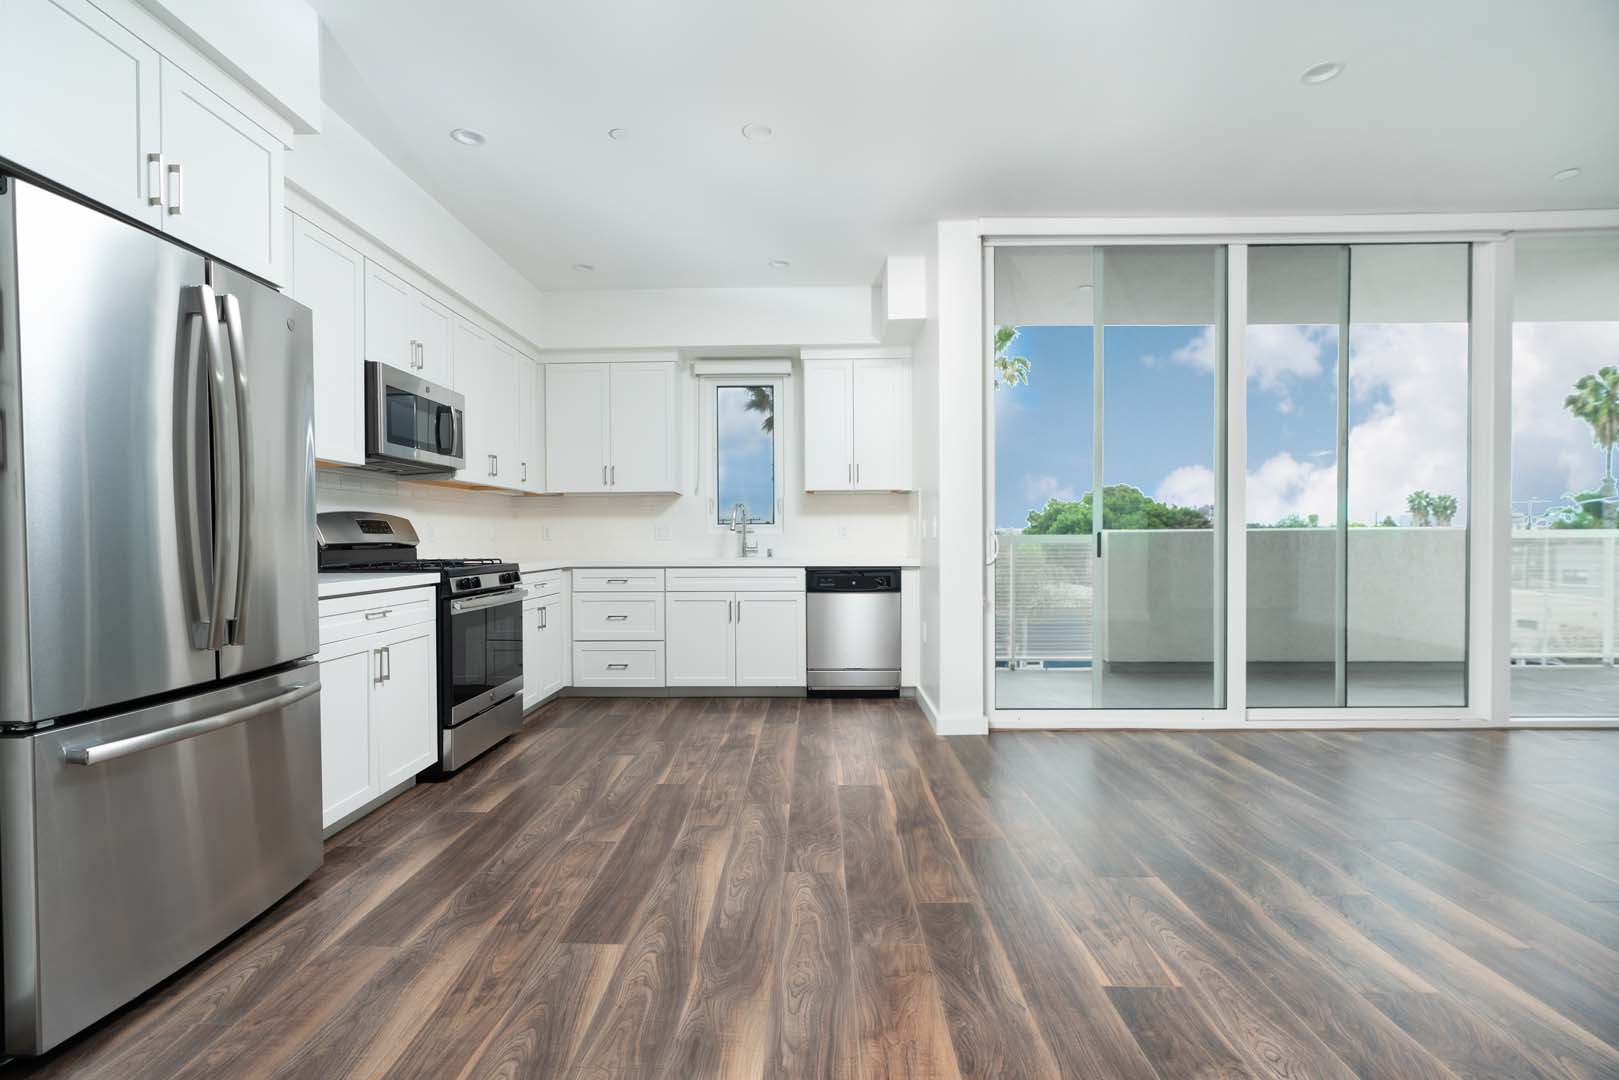 Apartments for Rent Culver City - The Lucky - Large Kitchen Space with Stainless Steel Appliances, Hardwood Floors, and Large Glass Sliding Door